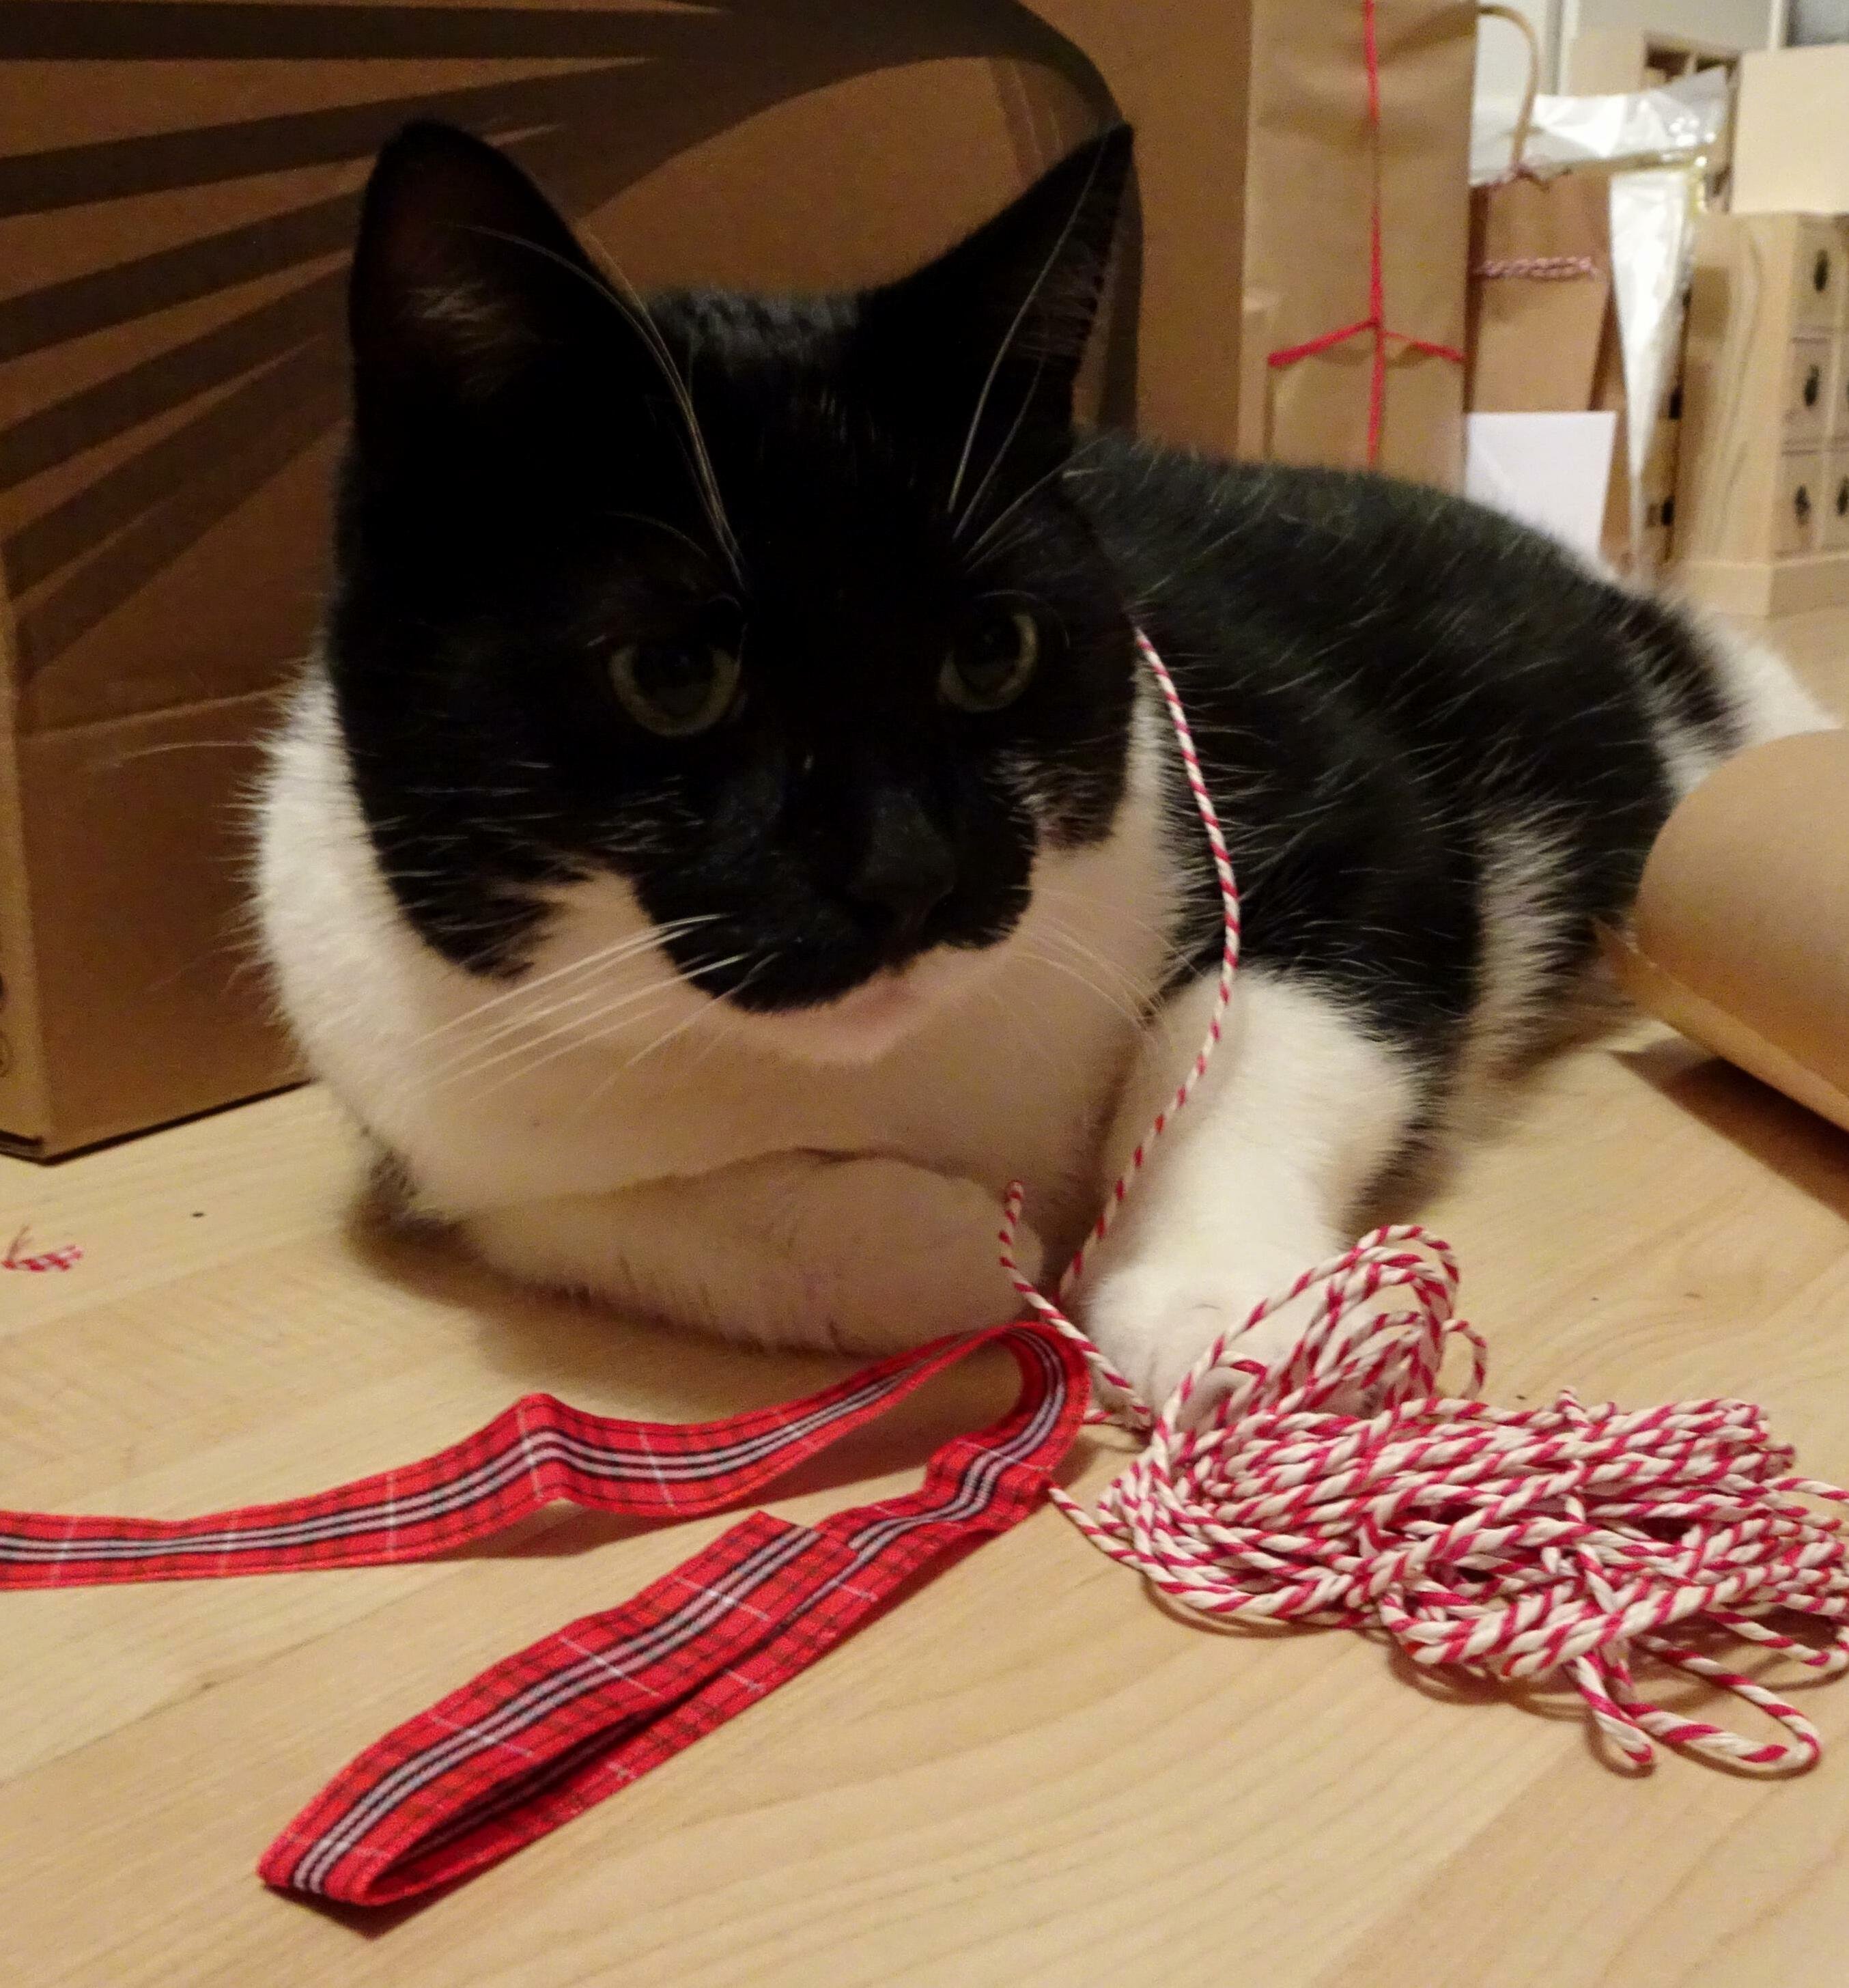 Edgar taking a break from gift wrapping